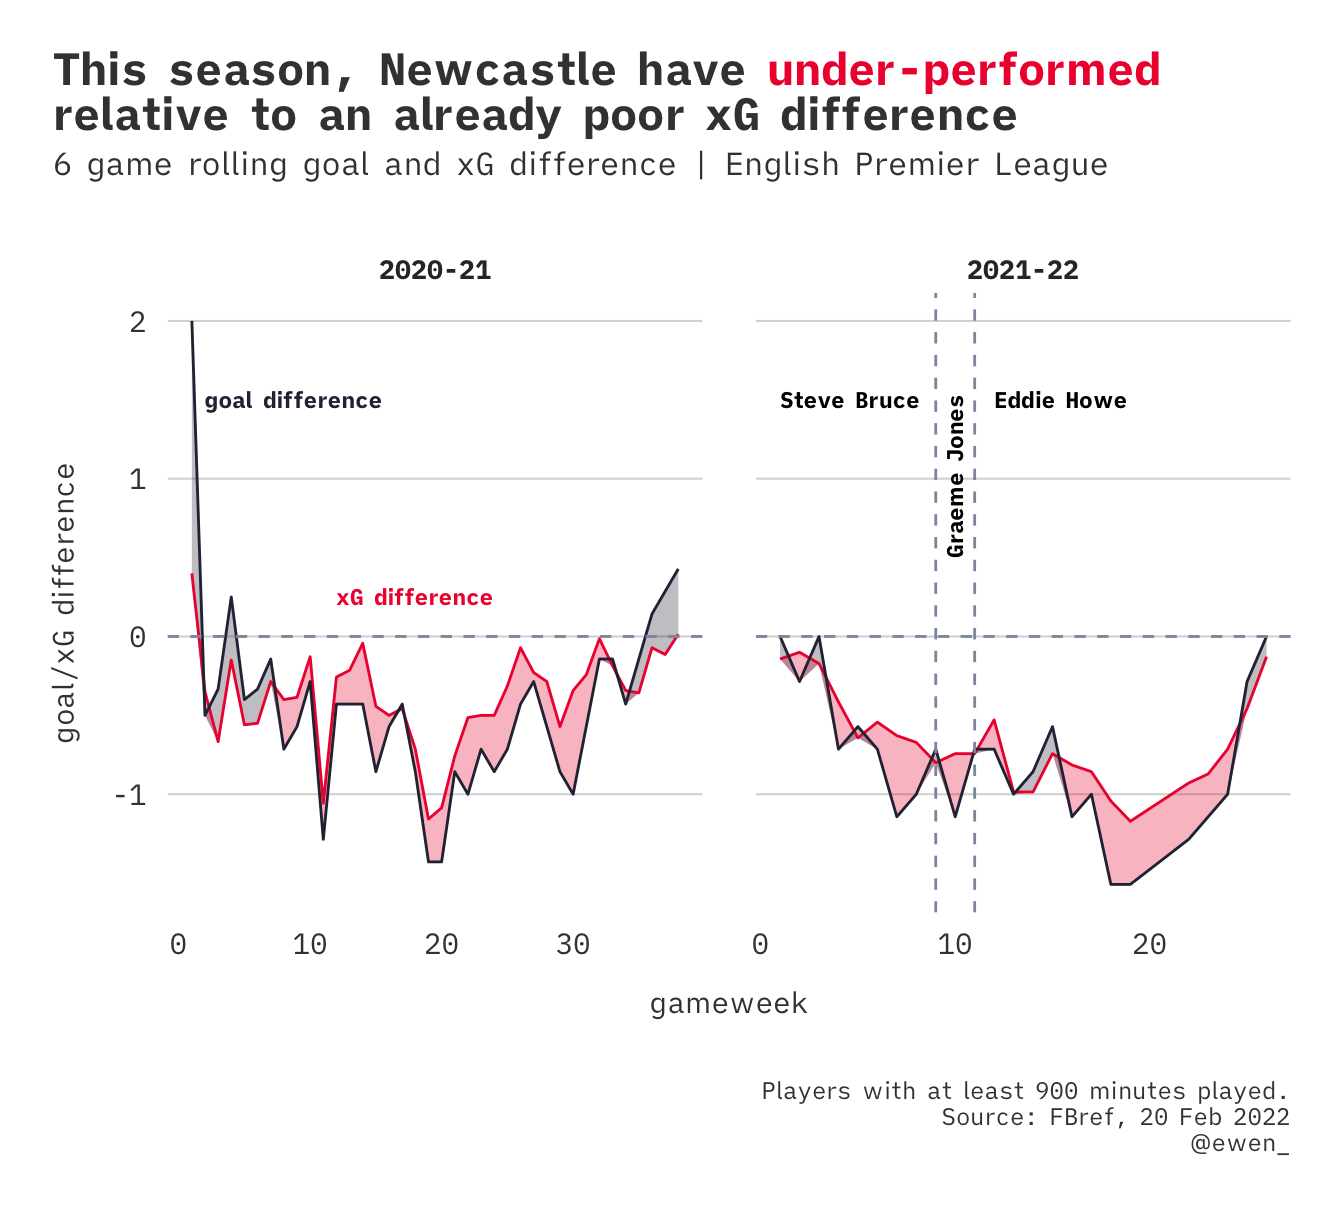 A chart demonstrating that Newcastle have under-performed relative to a poor xG difference